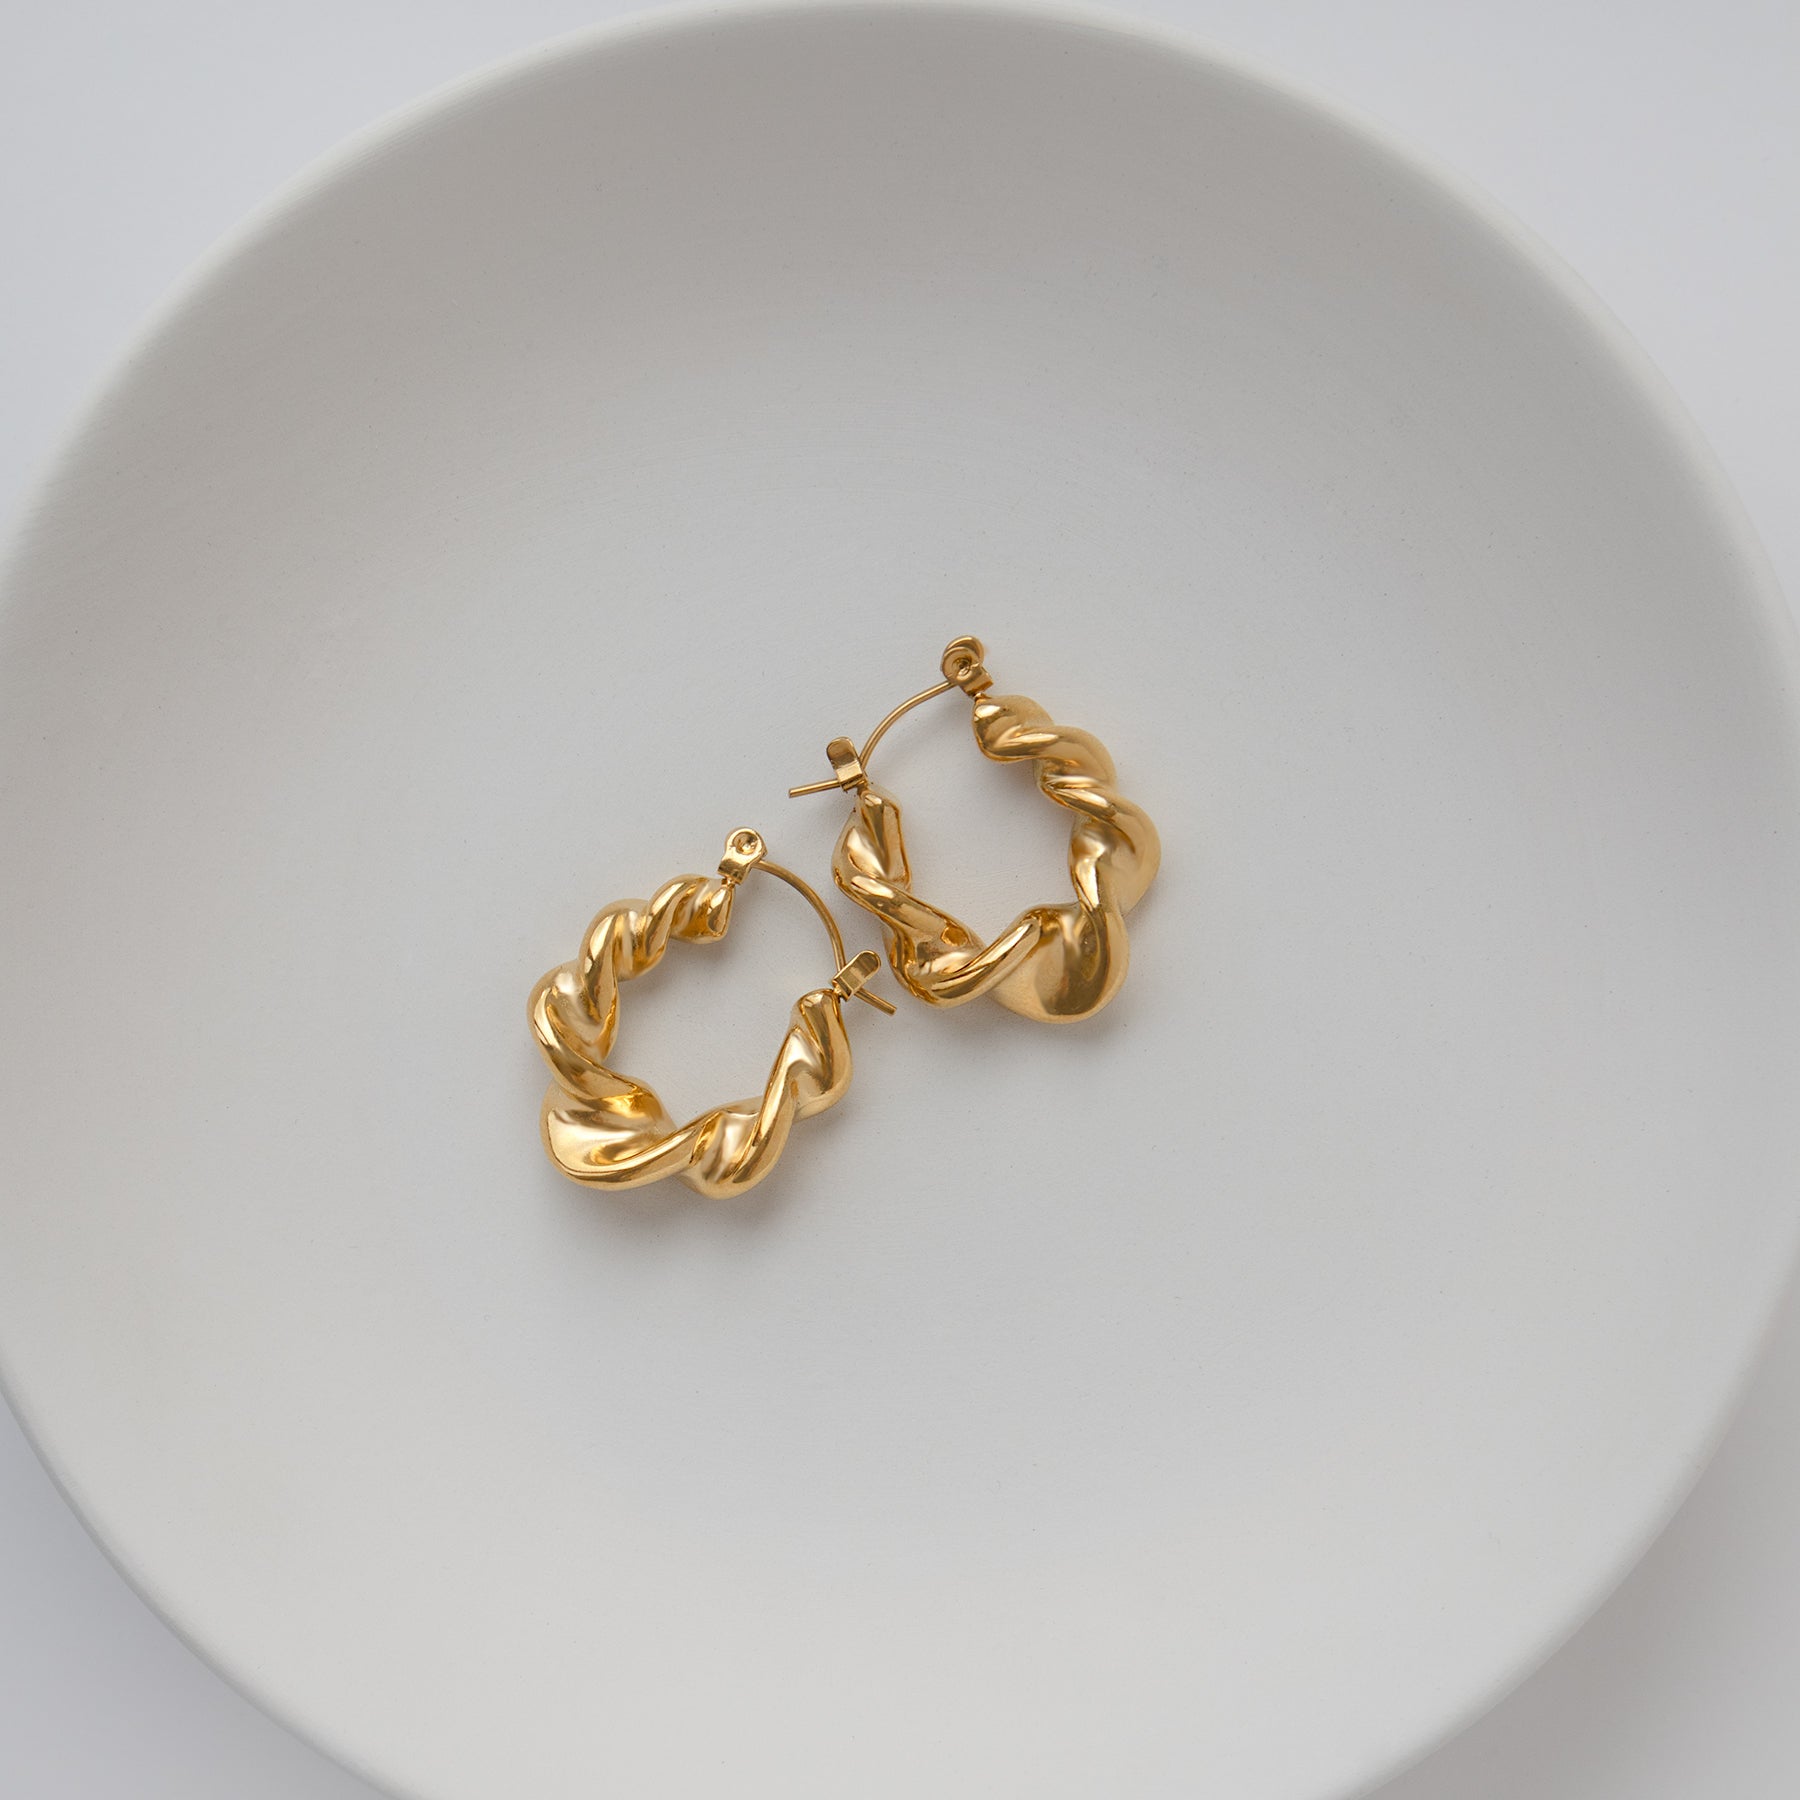 Chunky Twisted Hoop Earrings Non Tarnish displayed in a white dish